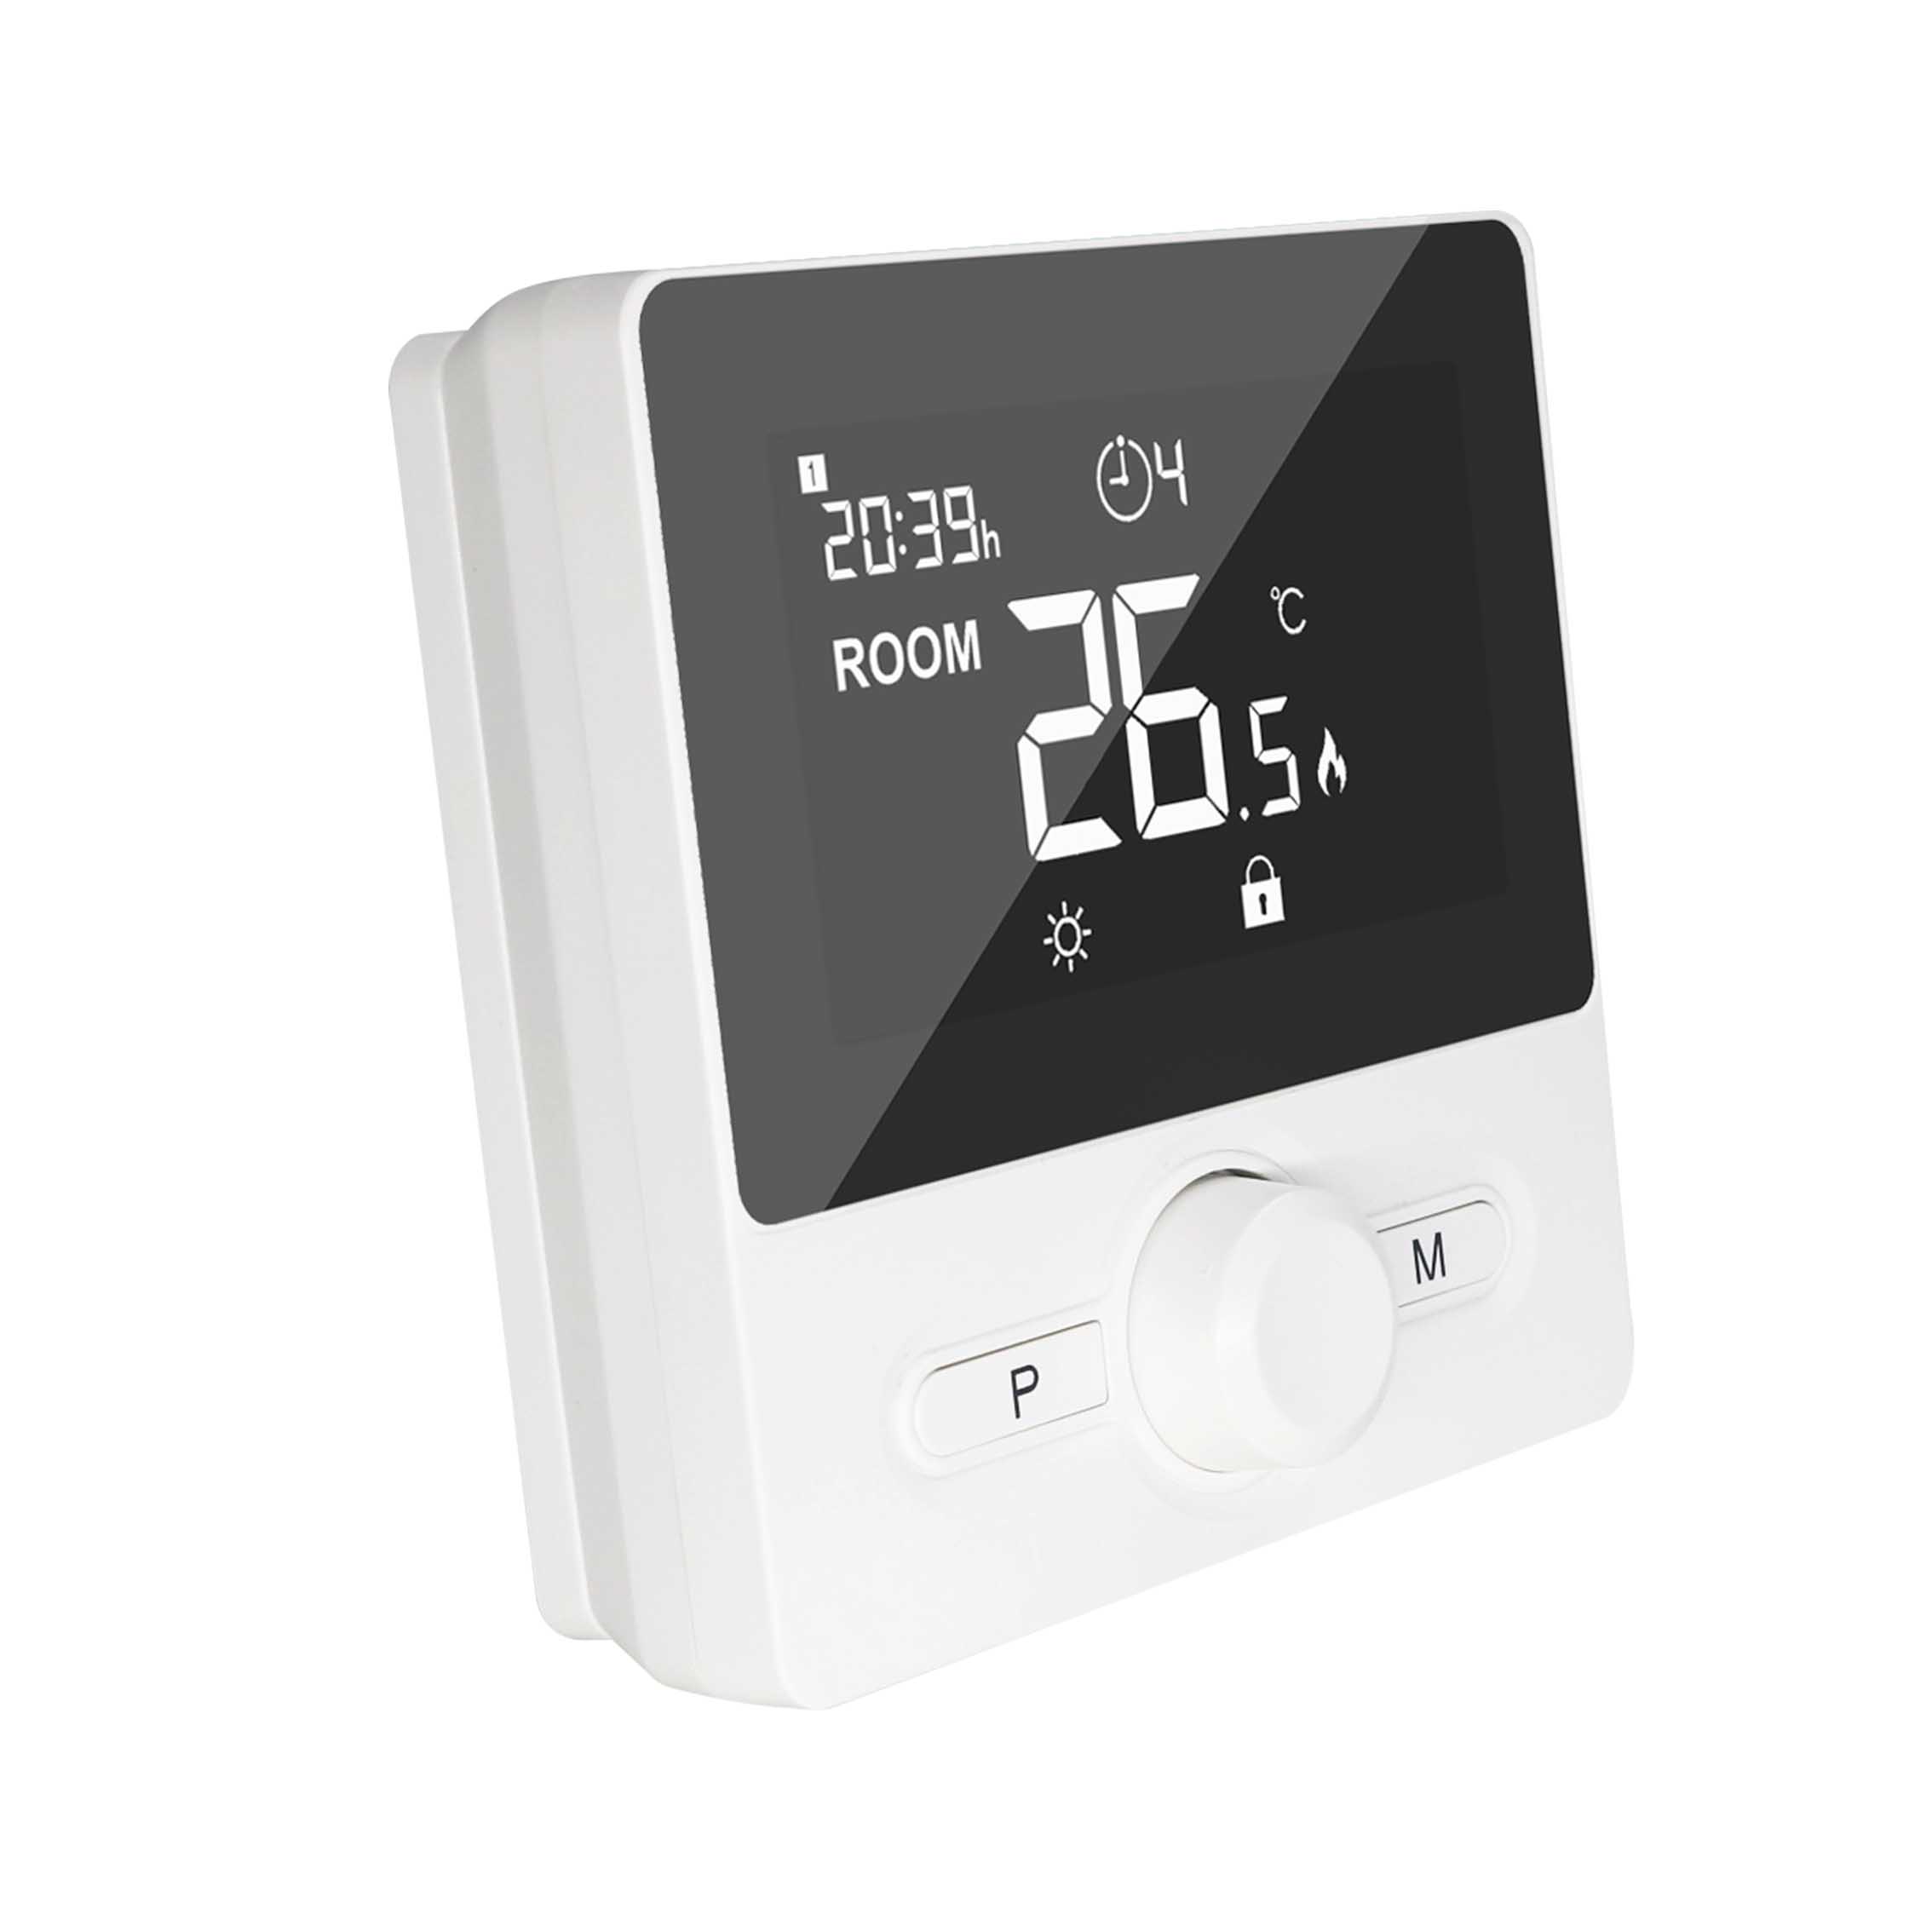 Enhance Efficiency and Convenience with our Smart RF Wireless Modbus Thermostat for Water Heat Pump Control